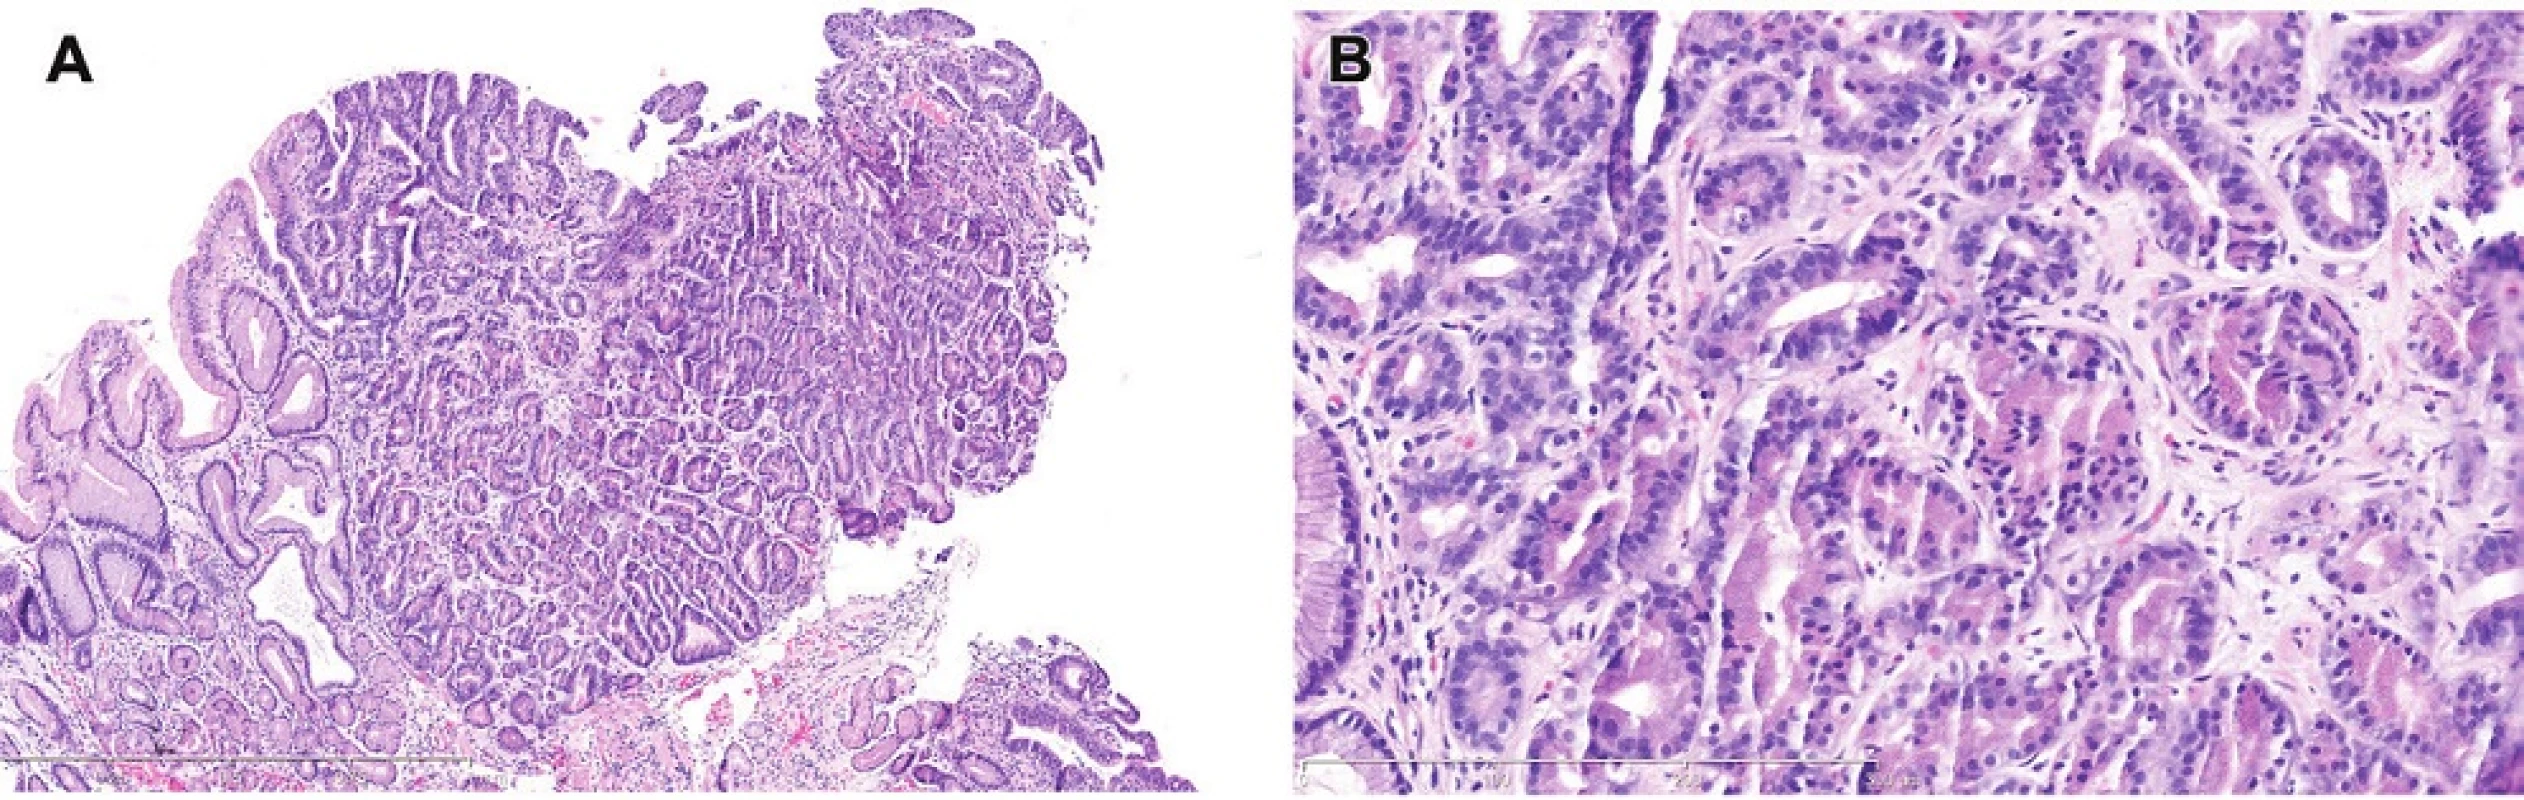 A. Dysplasia with chief cell differentiation. This unusual lesion has features of gastric lesions believed to have oxyntic or chief cell differentiation with deep eosinophilic cytoplasm and small round basal nuclei. Note, however, that the surface has stratified nuclei like those in intestinal type dysplasia.H&amp;E (40x). B. Dysplasia with chief cell differentiation. Note the angulated tubules, many containing cells with grey cytoplasm like that found in the chief cells of oxyntic mucosa. H&amp;E (200x).